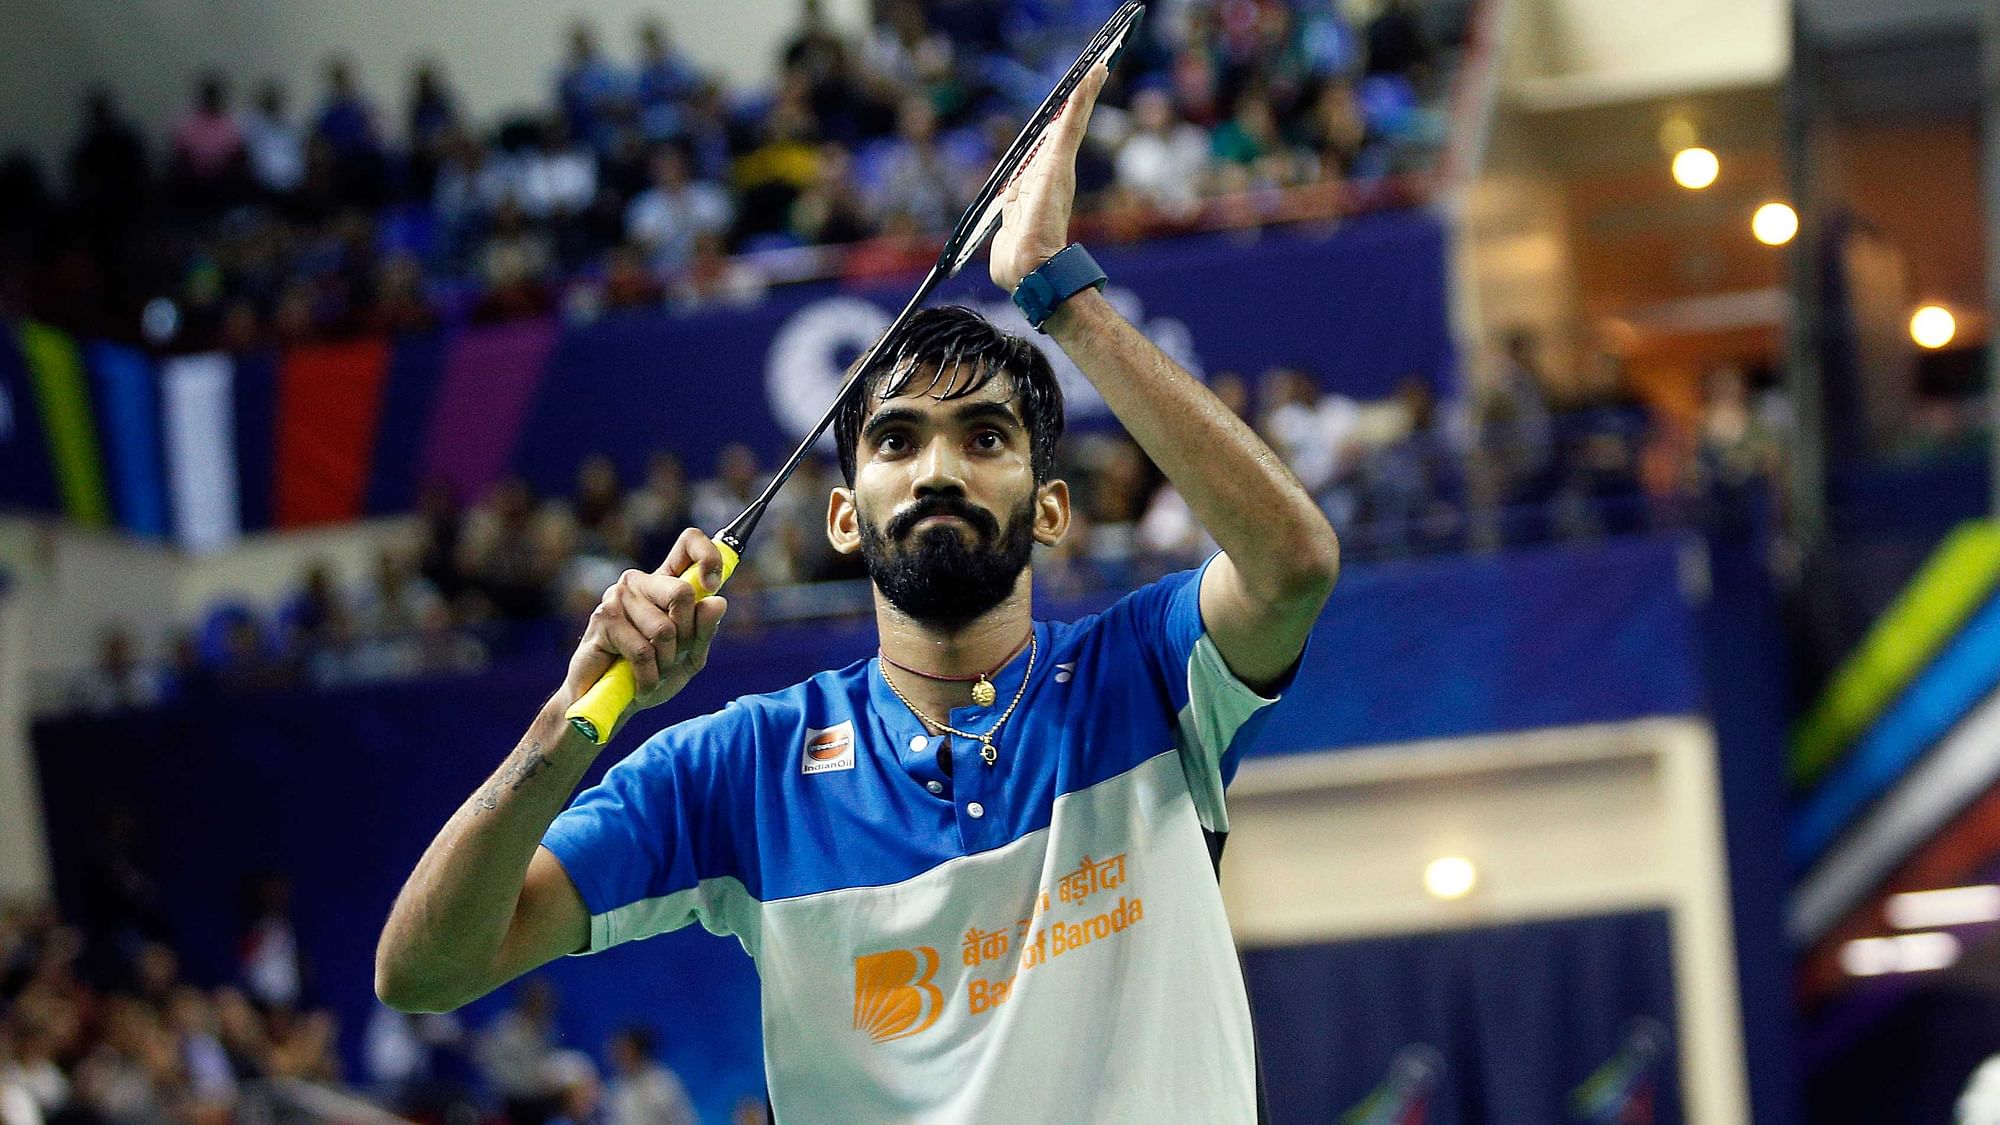 Kidambi Srikanth made the quarters for the first time in seven months after claiming a thrilling win in men’s singles on Thursday.